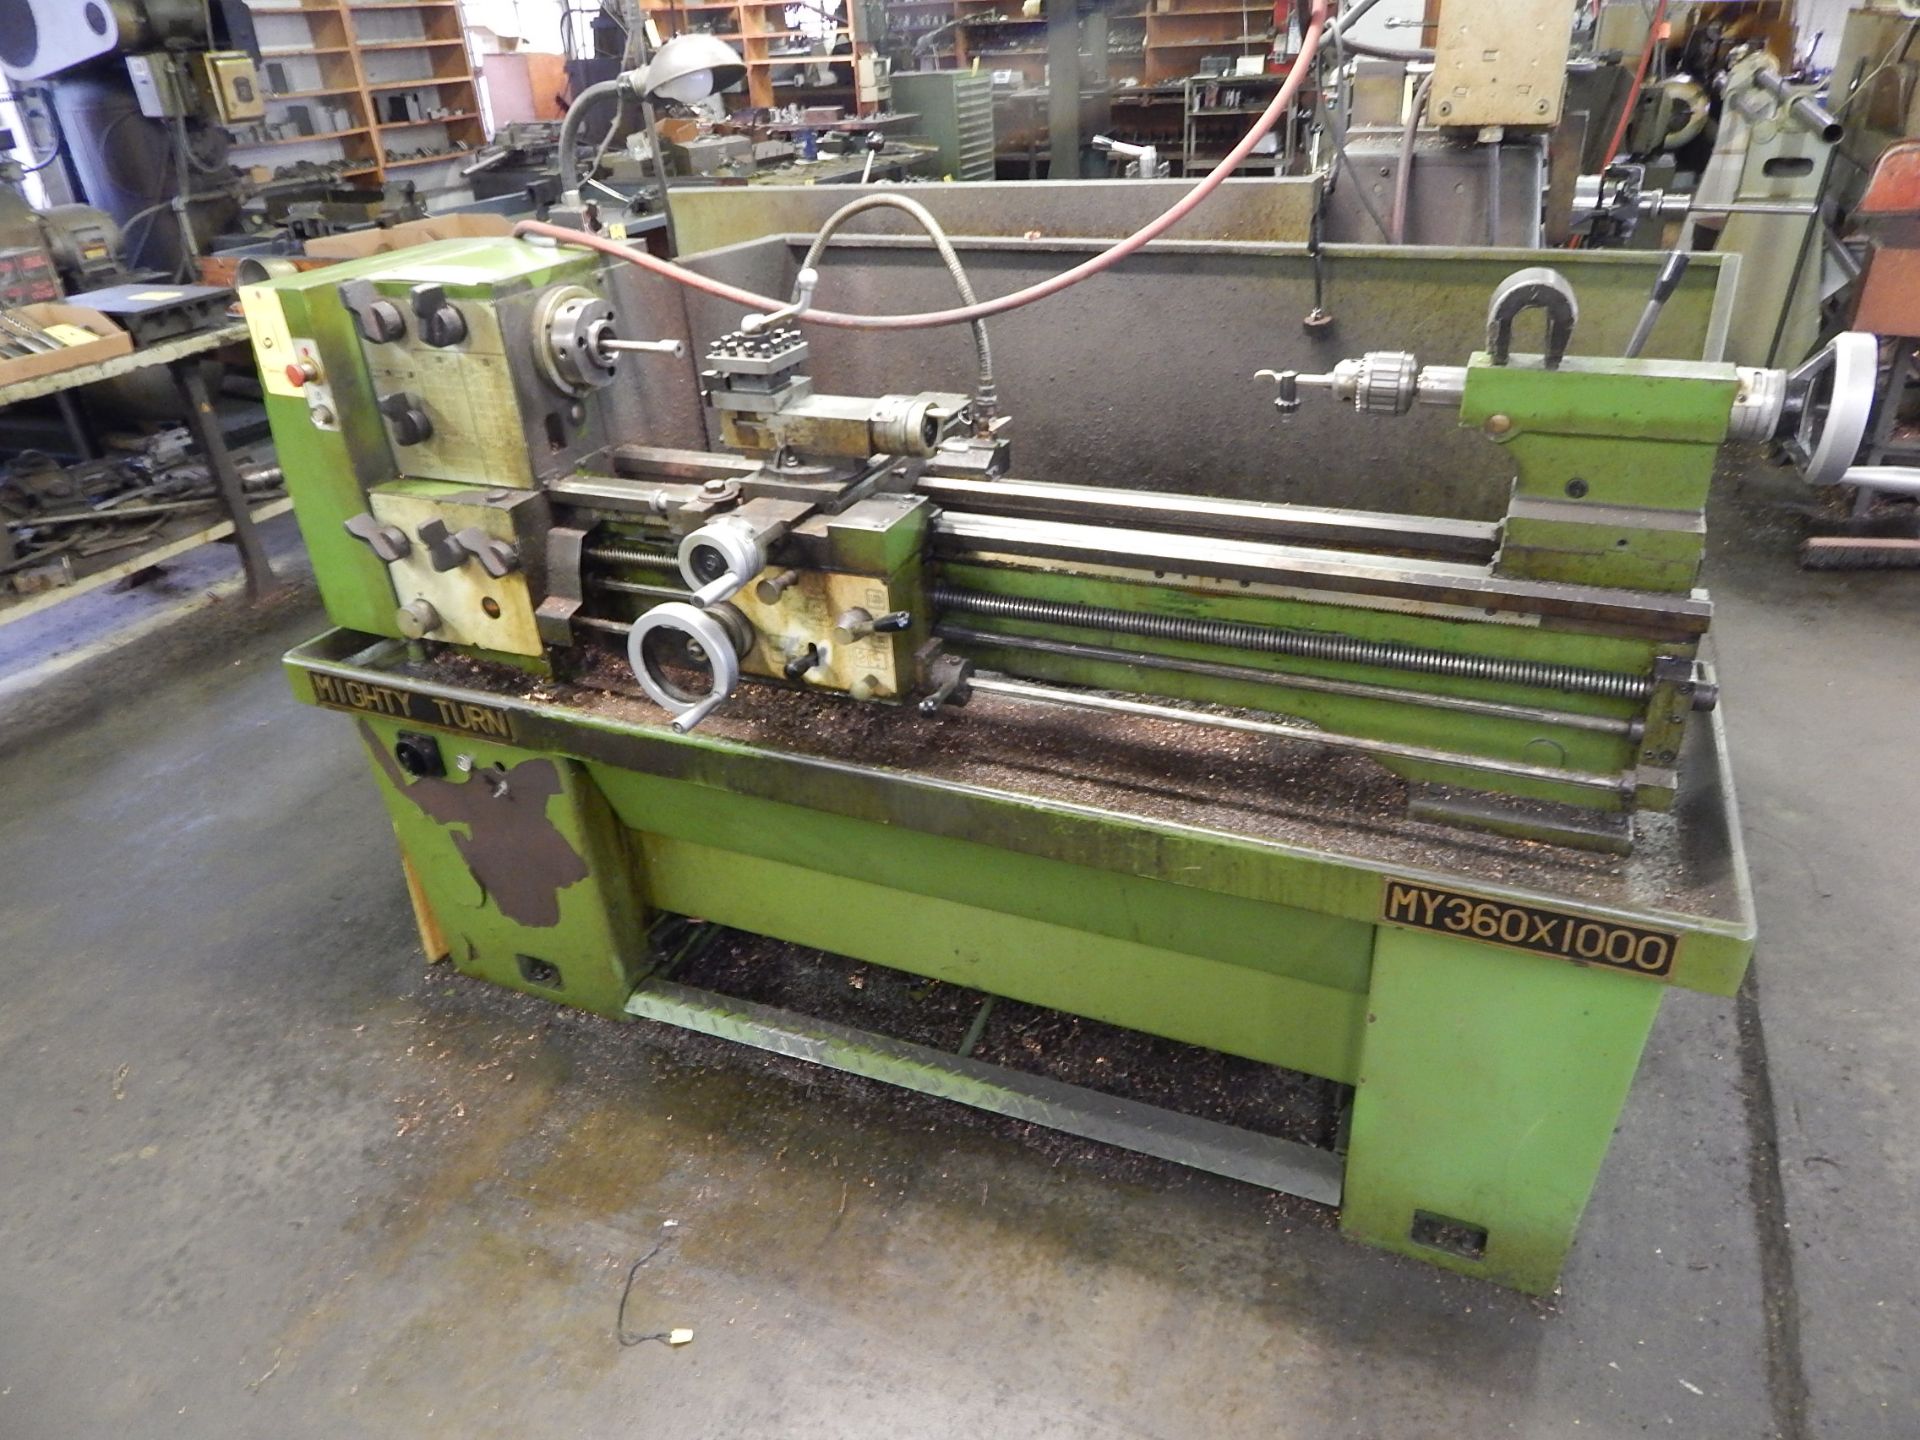 Mighty Turn MY 360 X 1000 Tool Room Lathe, 14" X 40", s/n 22066, 5C Collet Nose, Loading Fee $100.00 - Image 4 of 4